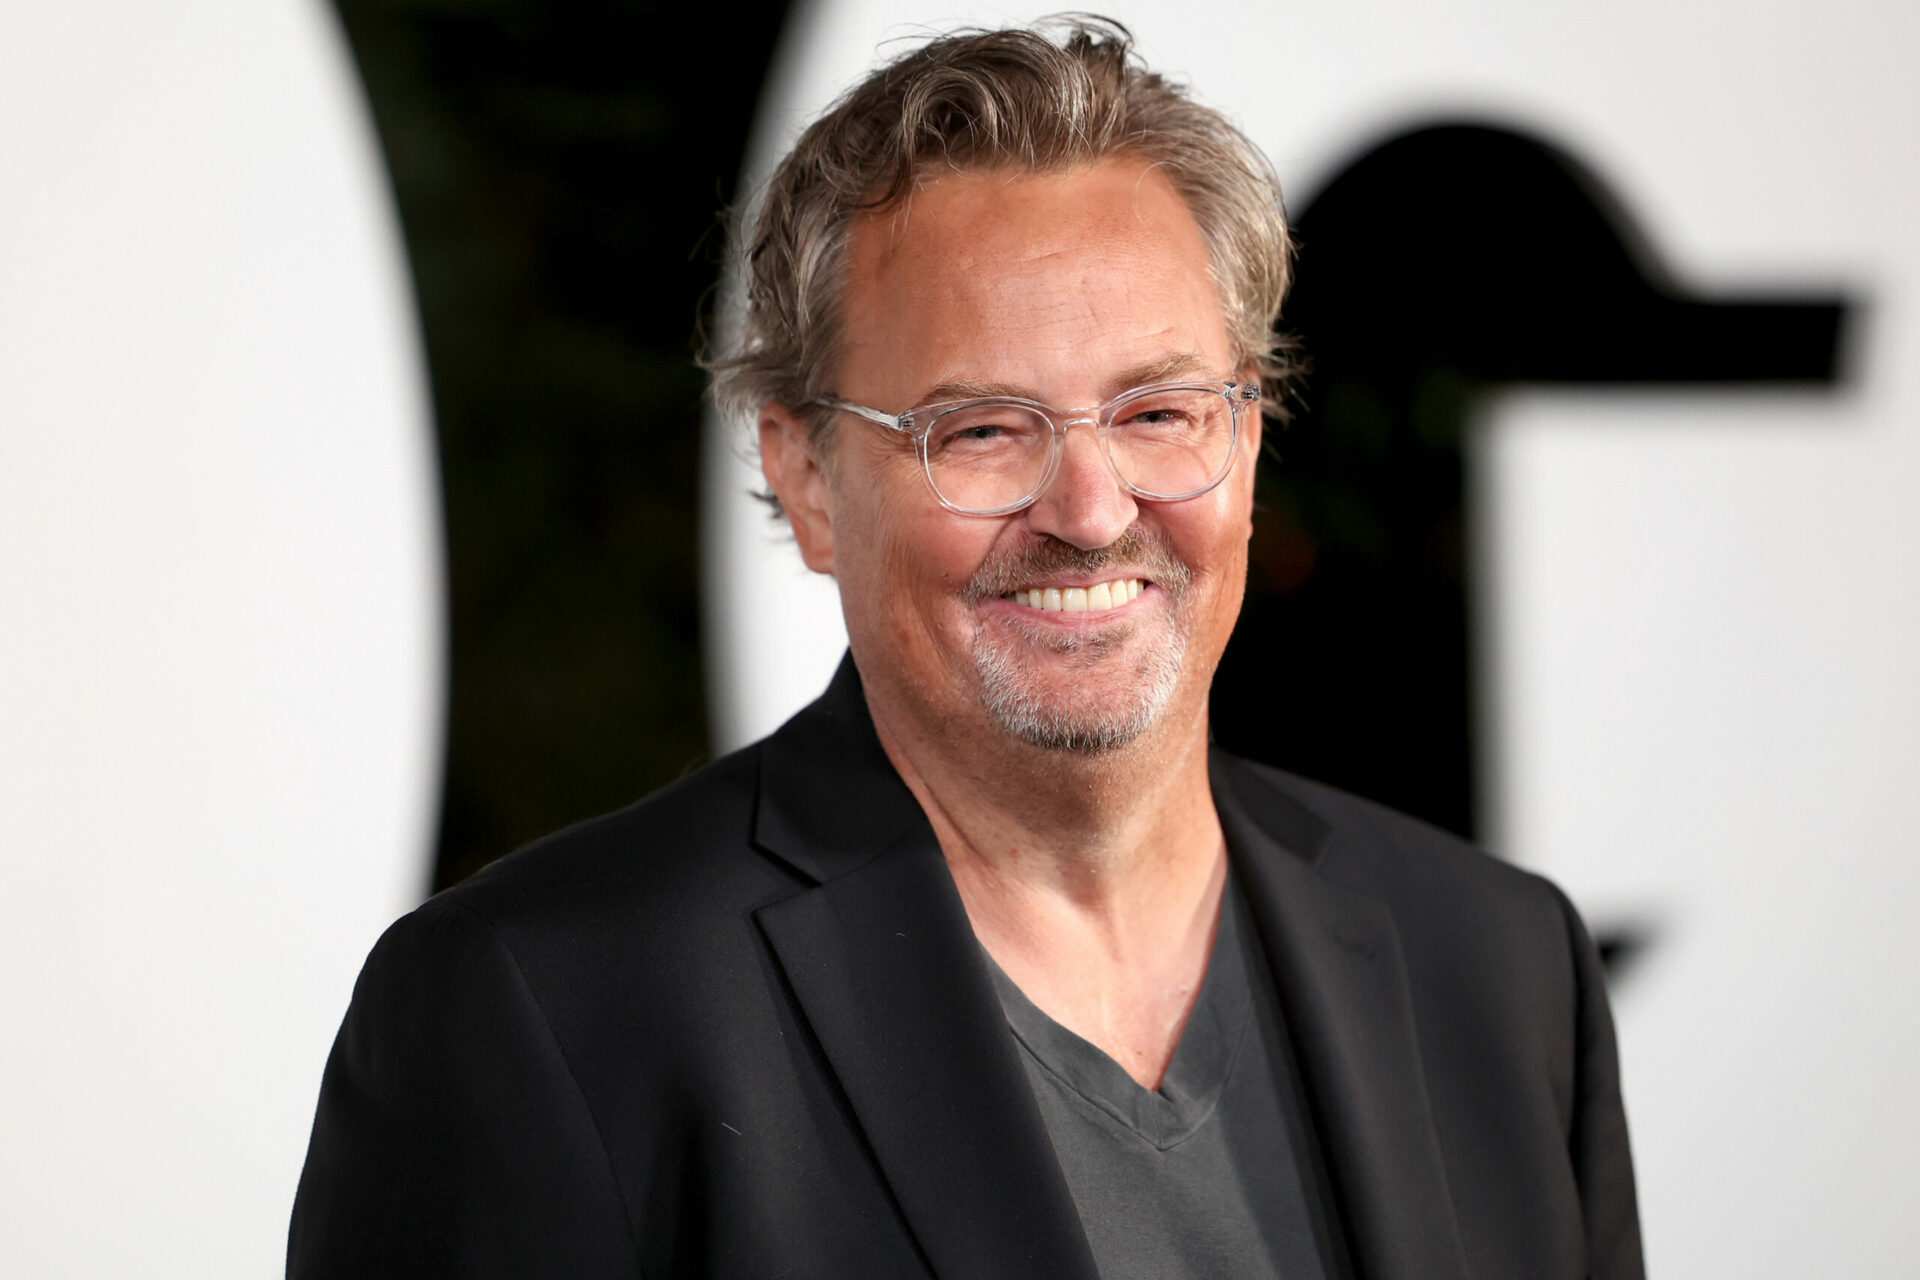 Matthew Perry’s death certificate released 3 weeks after star’s sudden passing